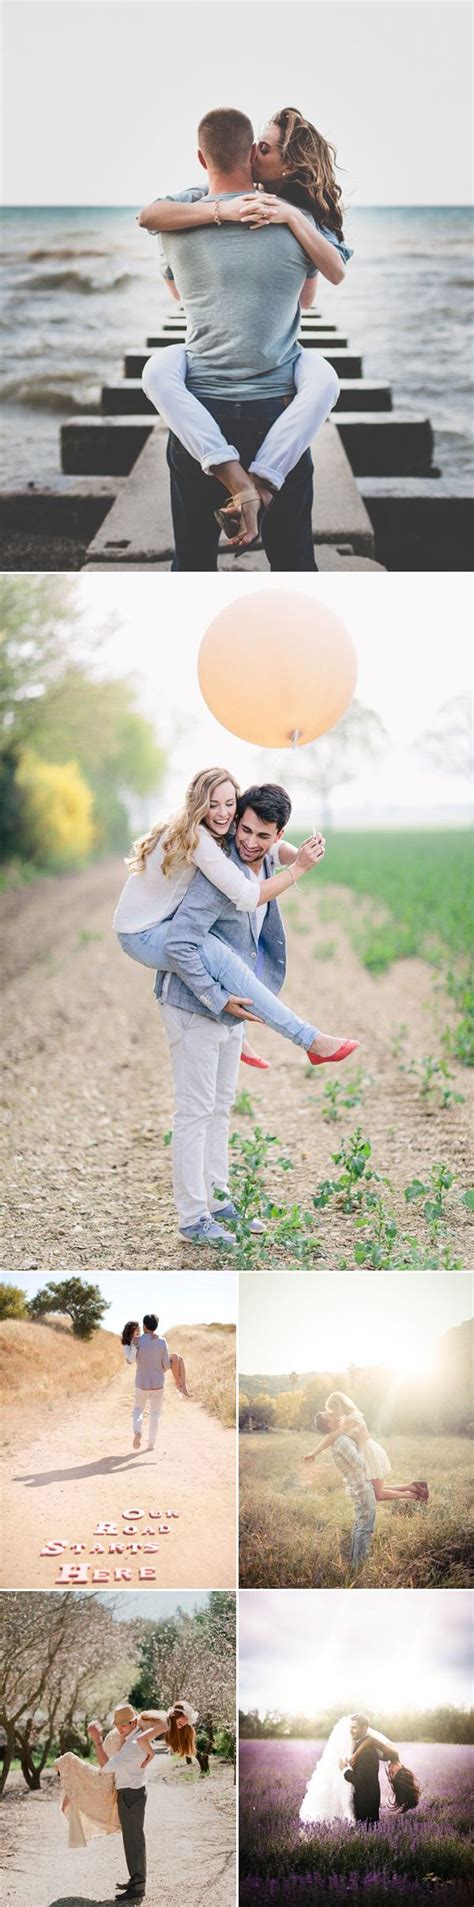 37 must try cute couple photo poses praise wedding photo poses for couples cute couples